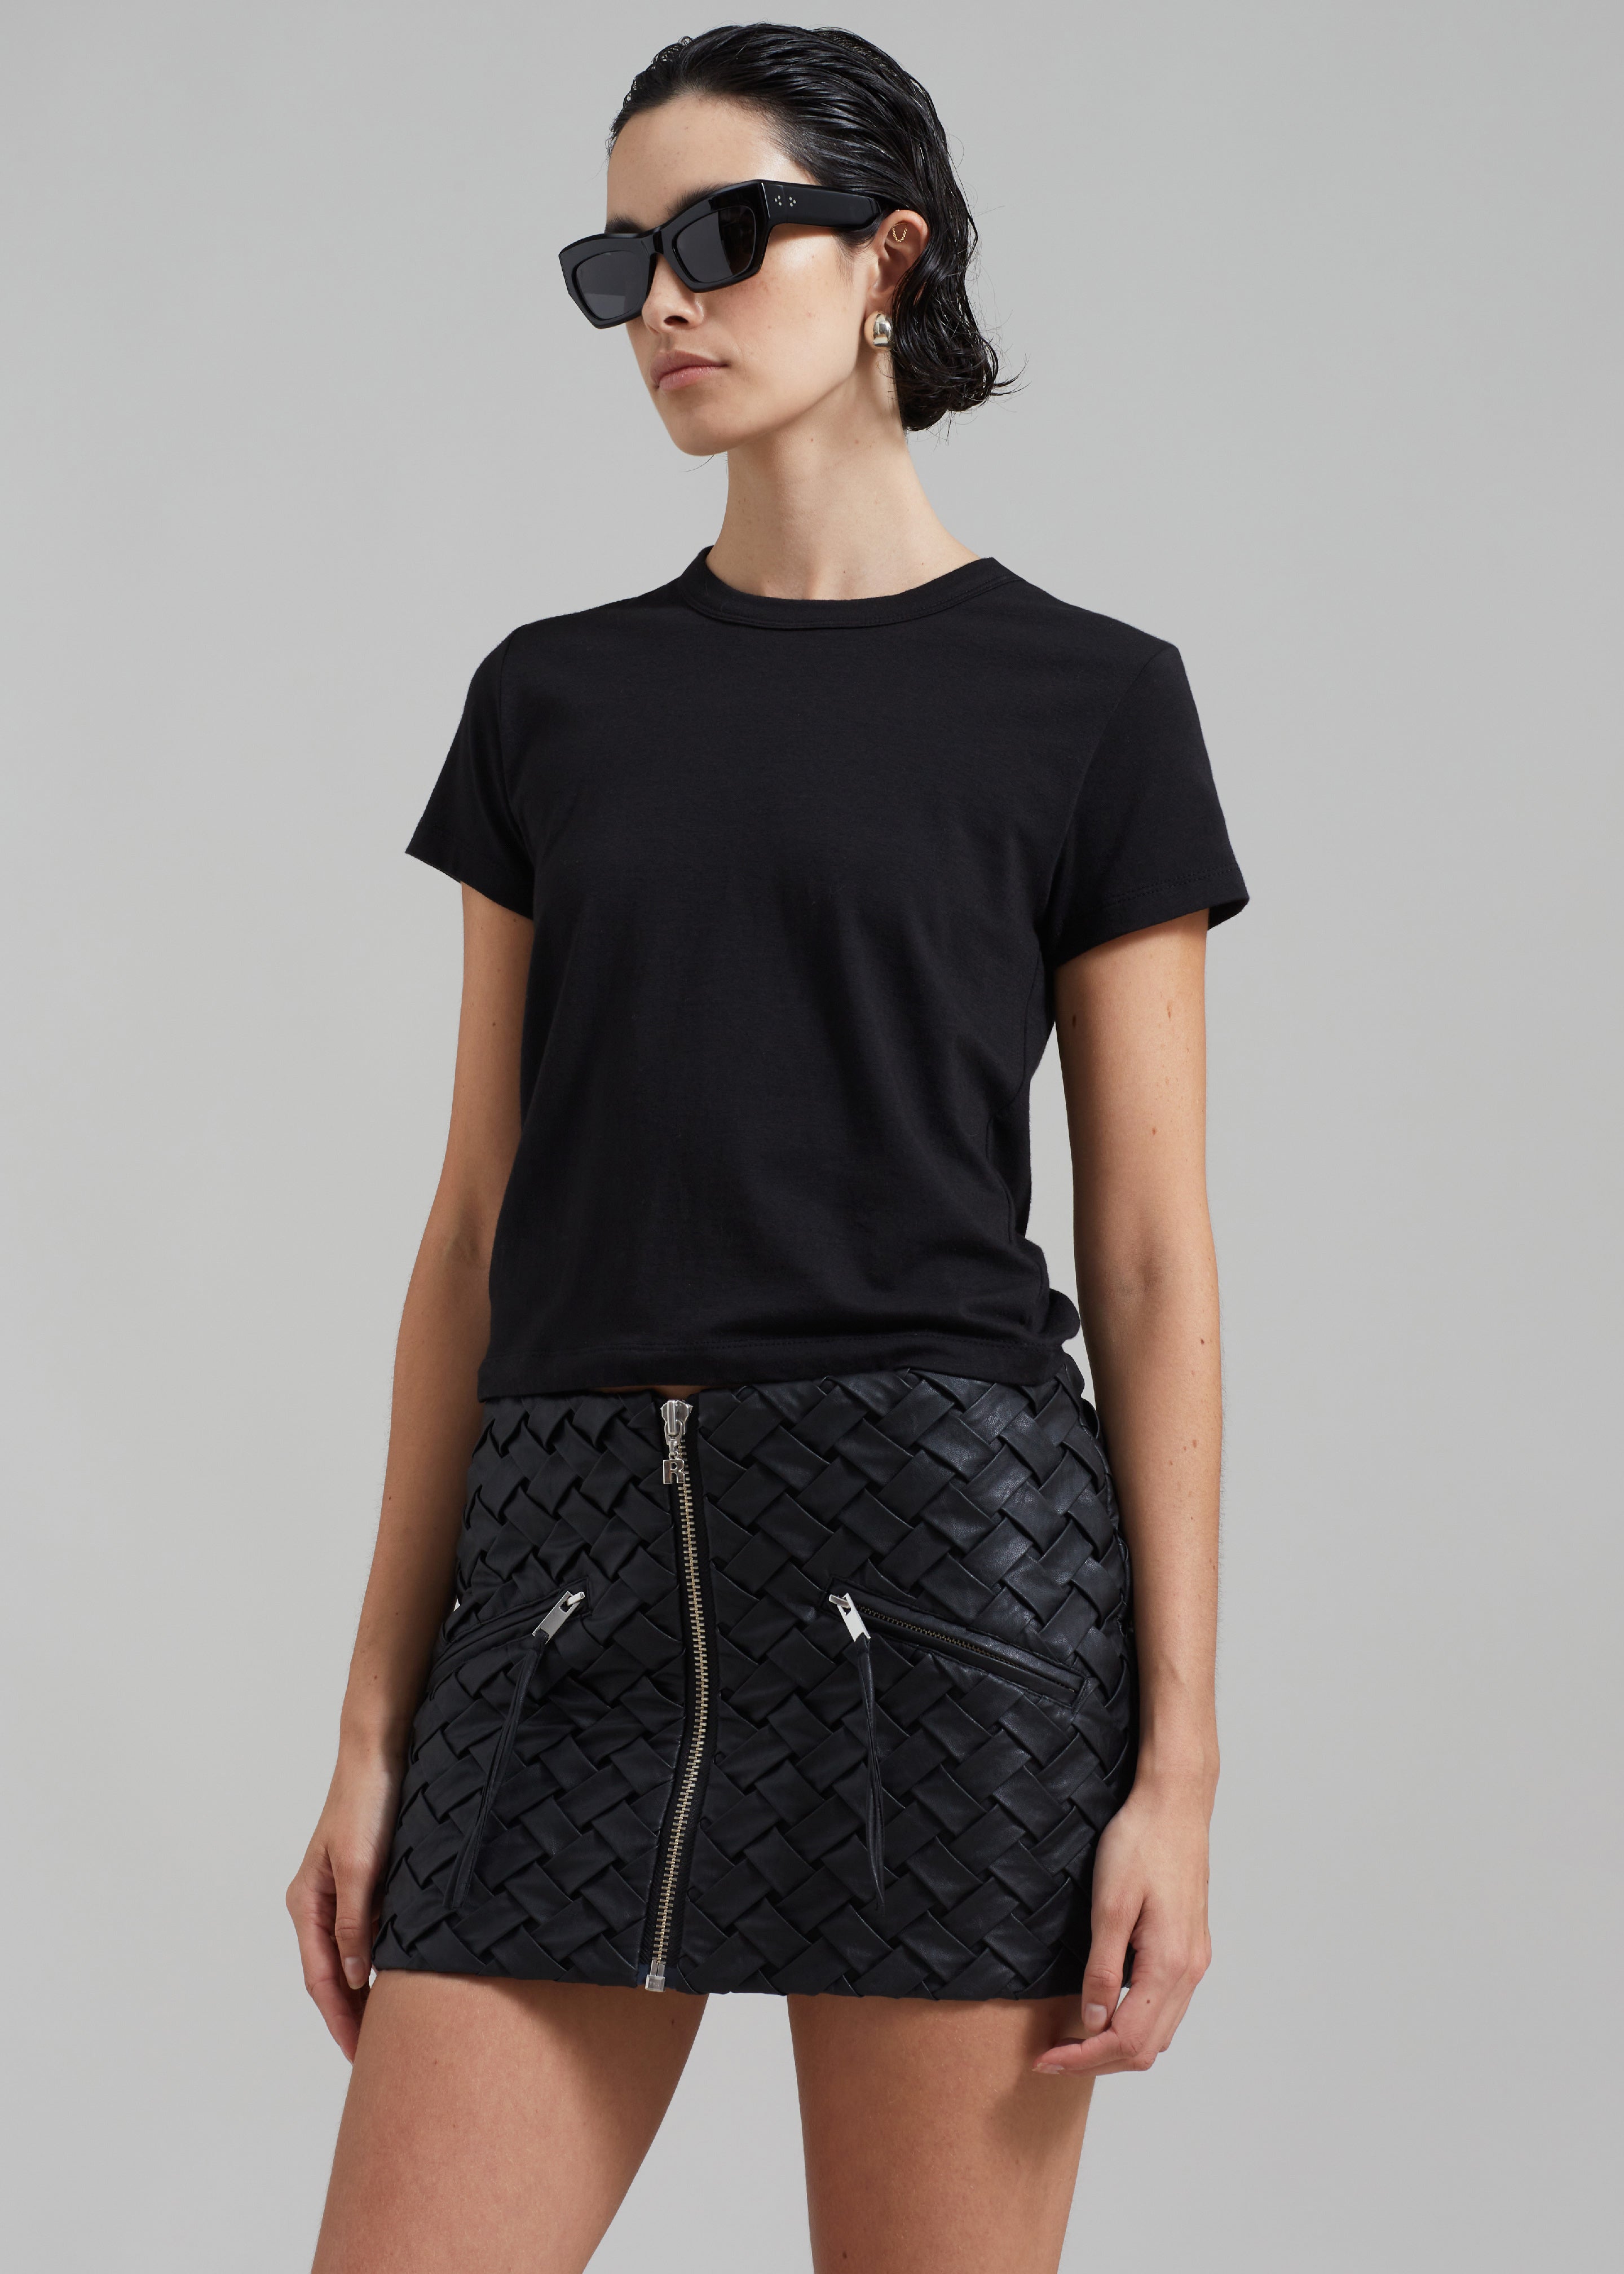 Topshop bea quilted fanny pack in black